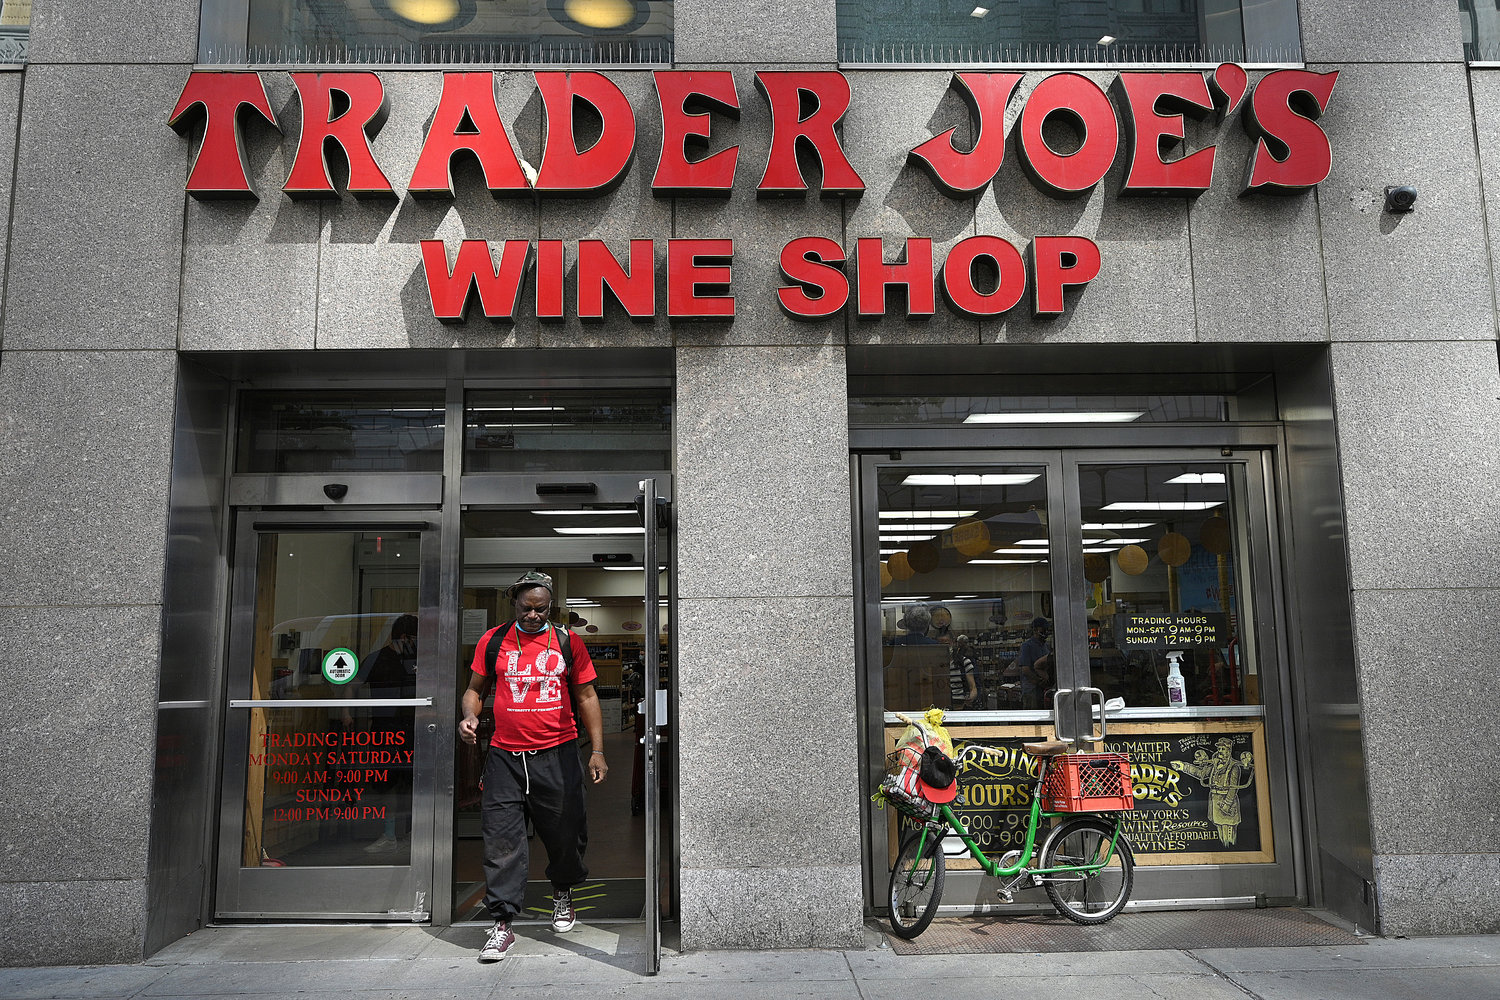 The Trader Joe's Union Square Wine Shop on East 14th Street was abruptly closed in August. Workers at the shop were said to have been strongly in favor of forming a union and a petition for a unionization vote appeared imminent when it was shuttered.